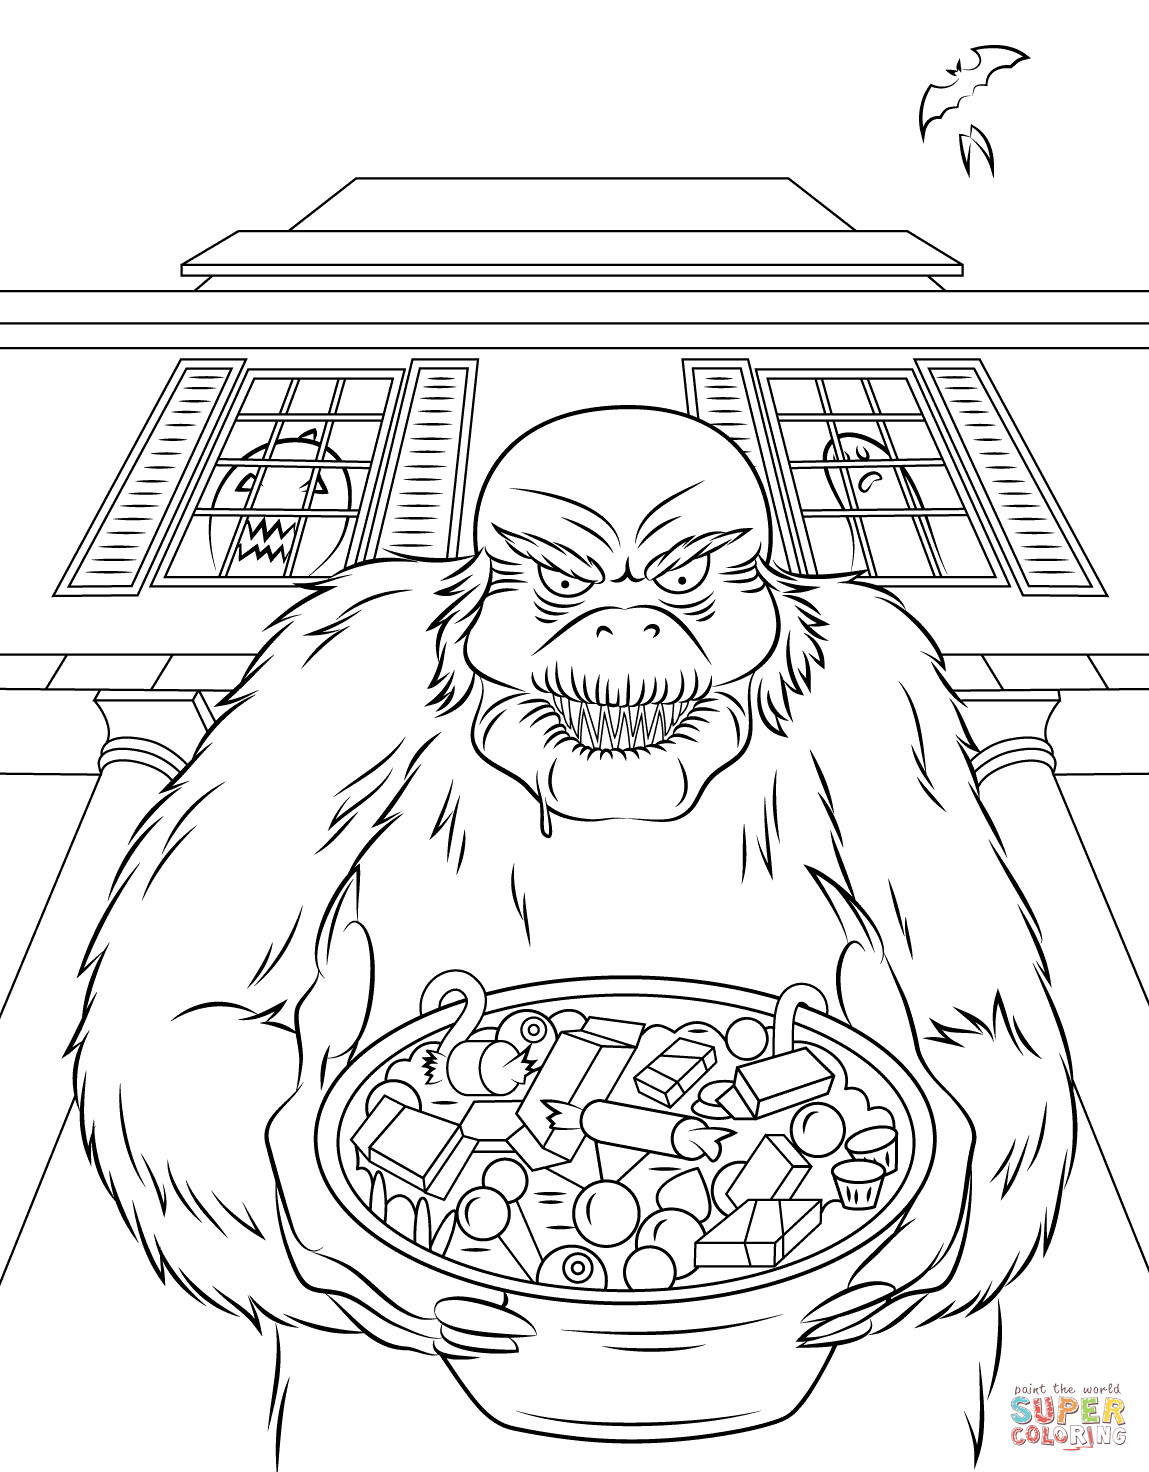 Goosebumps Coloring Pages Printable
 Goosebumps coloring page